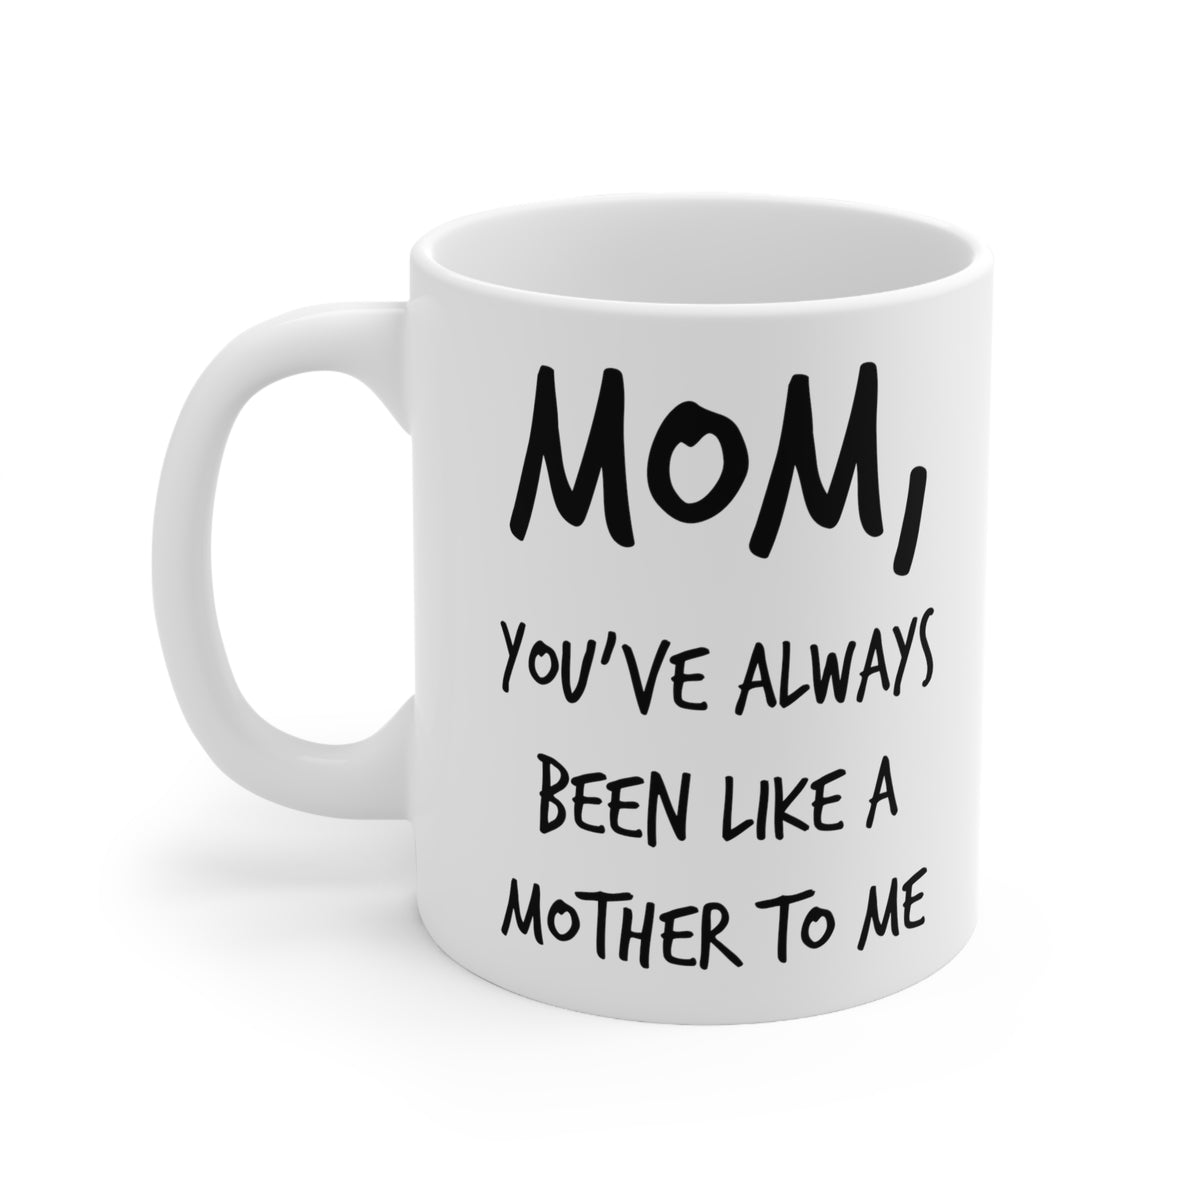 Mom Coffee Mug - Mom, You've Always Been Like A Mother To Me - Mother's Day Coffee Mug, Tea Cup From Son Daughter